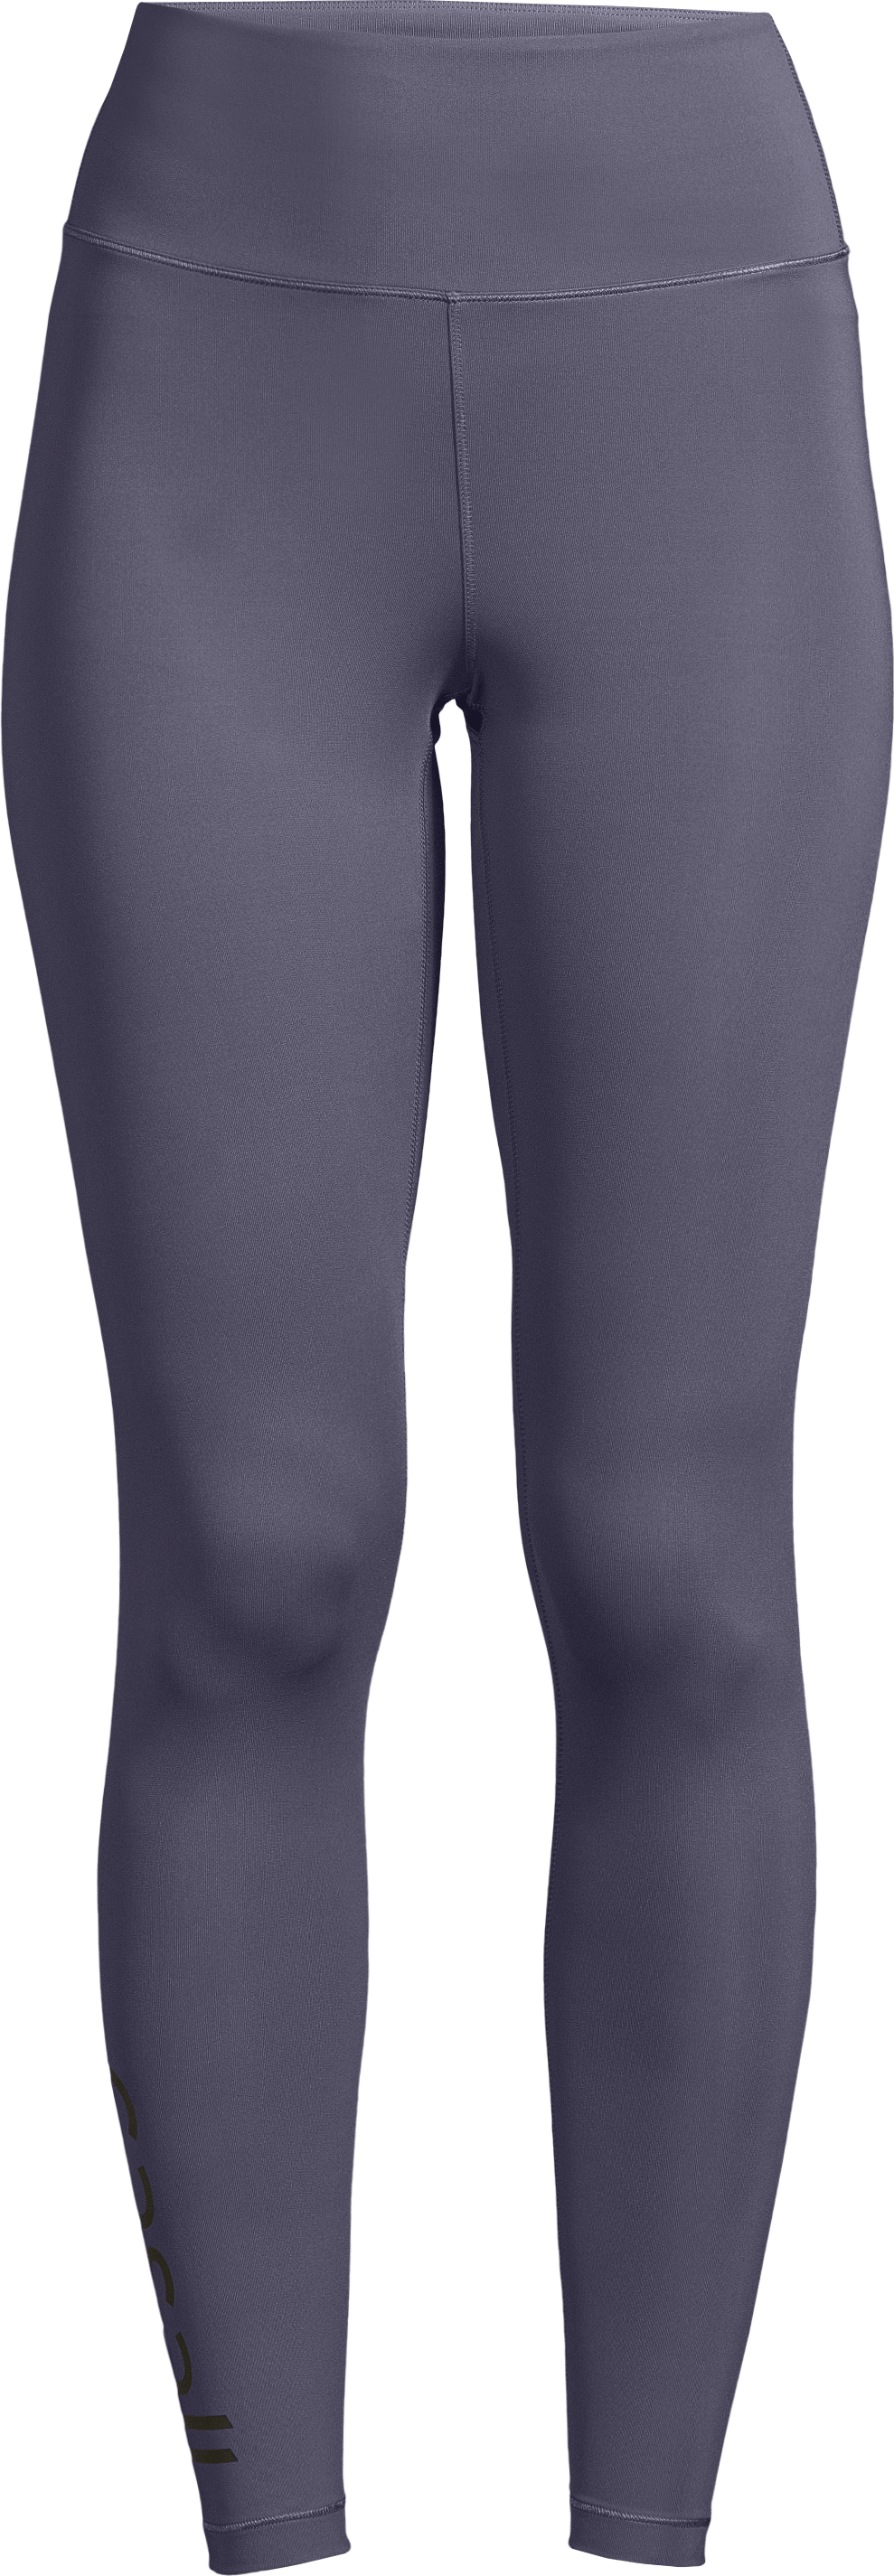 Women's Graphic Sport Tights Nordic Blue